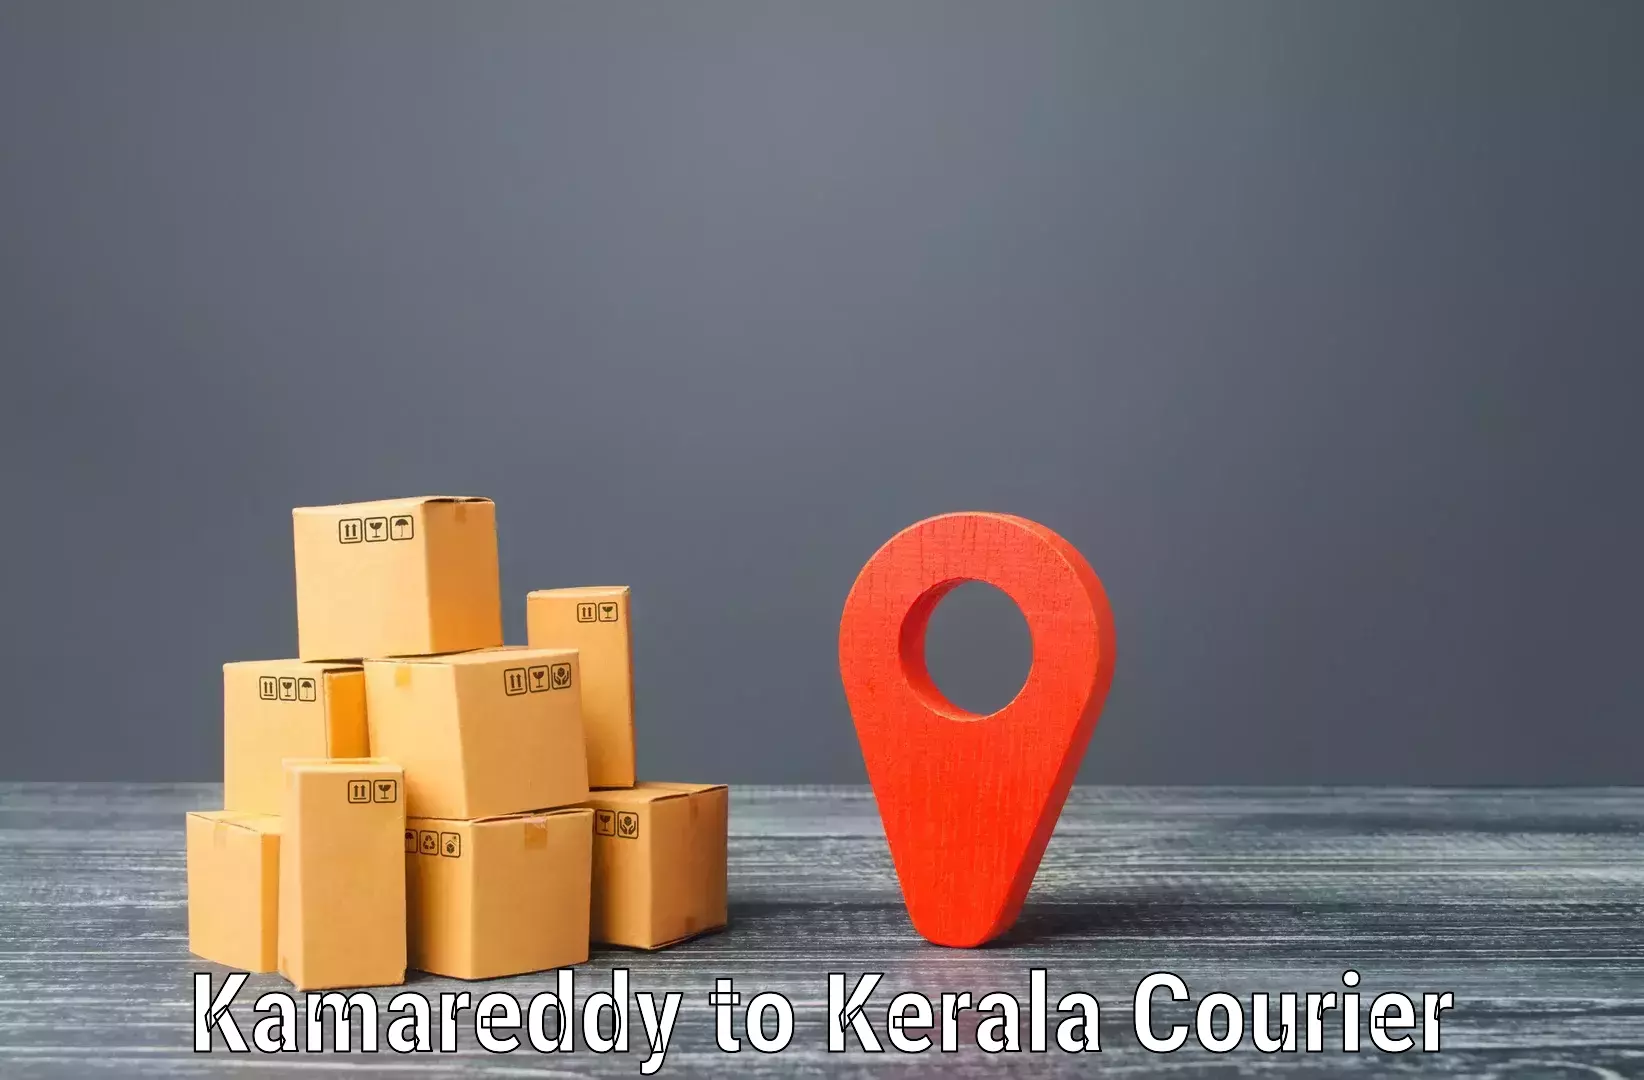 Nationwide parcel services Kamareddy to Kochi